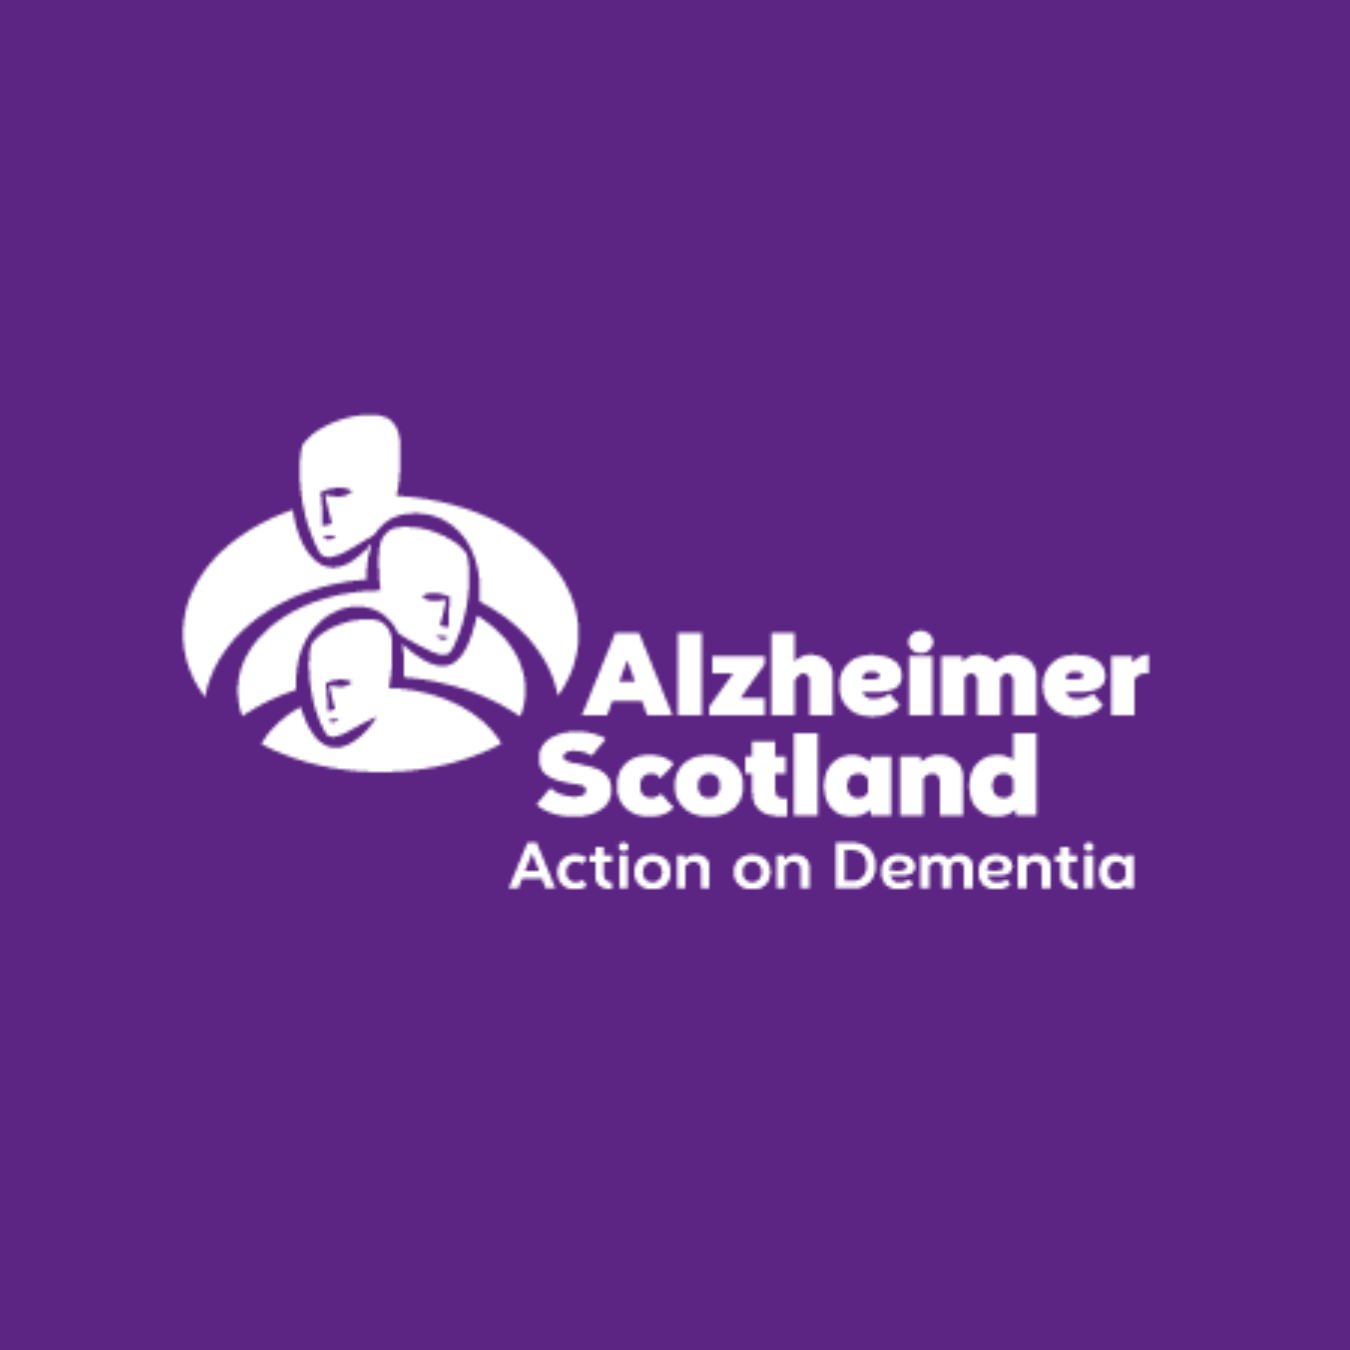 Charity logo - Purple background with white icon of three faces and text reading Alzheimer Scotland 'Action on Dementia'